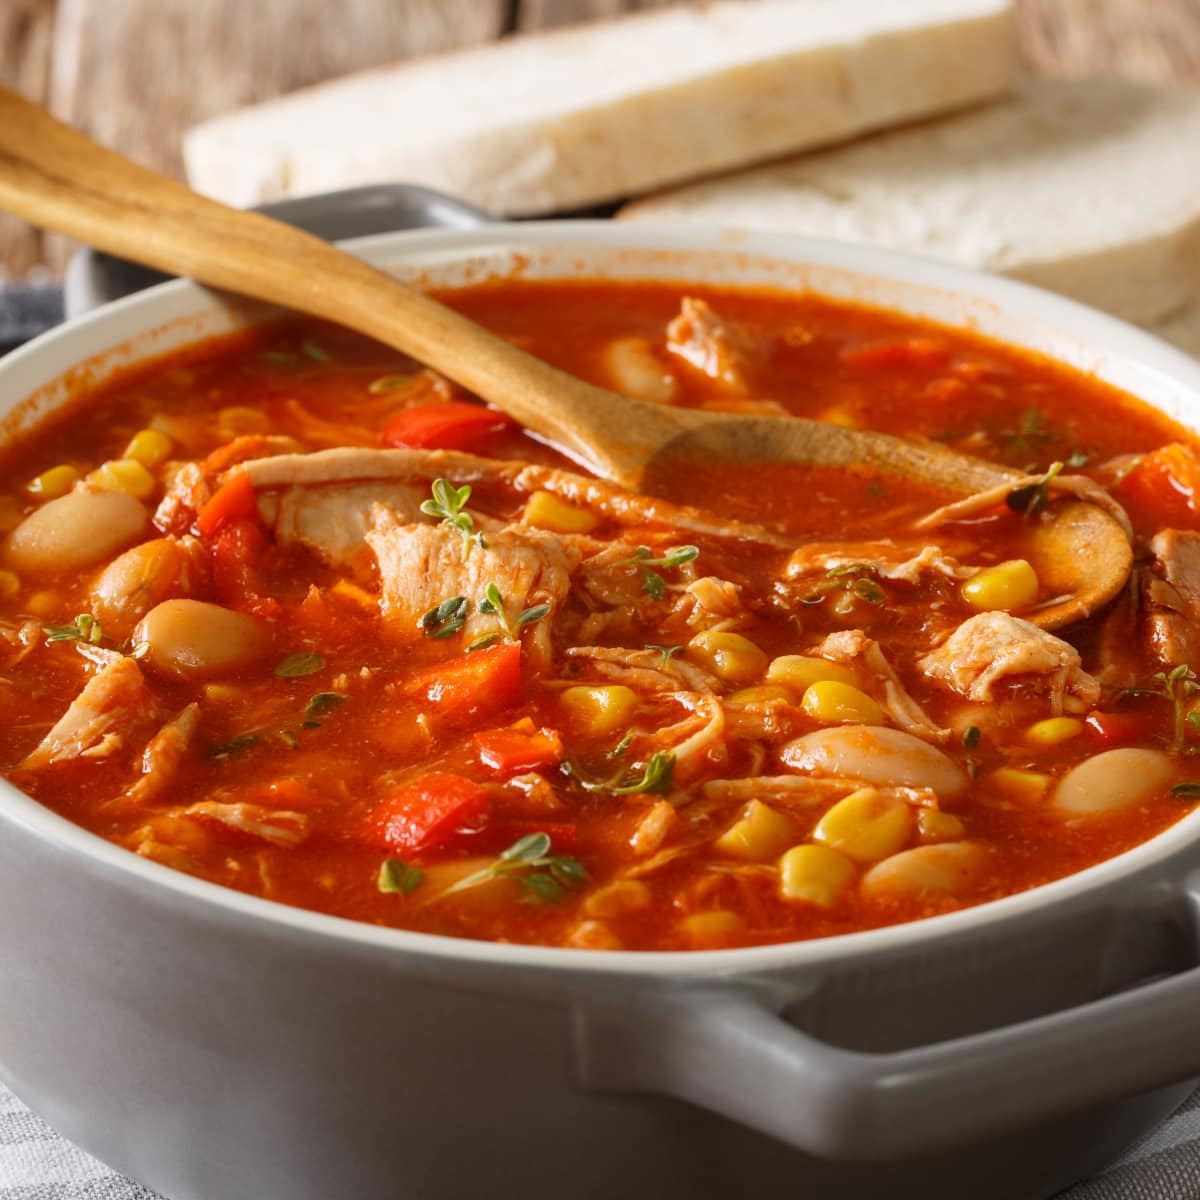 A wooden ladle dipped in a pot of Brunswick stew made with tomato base, chicken, veggies and beans.